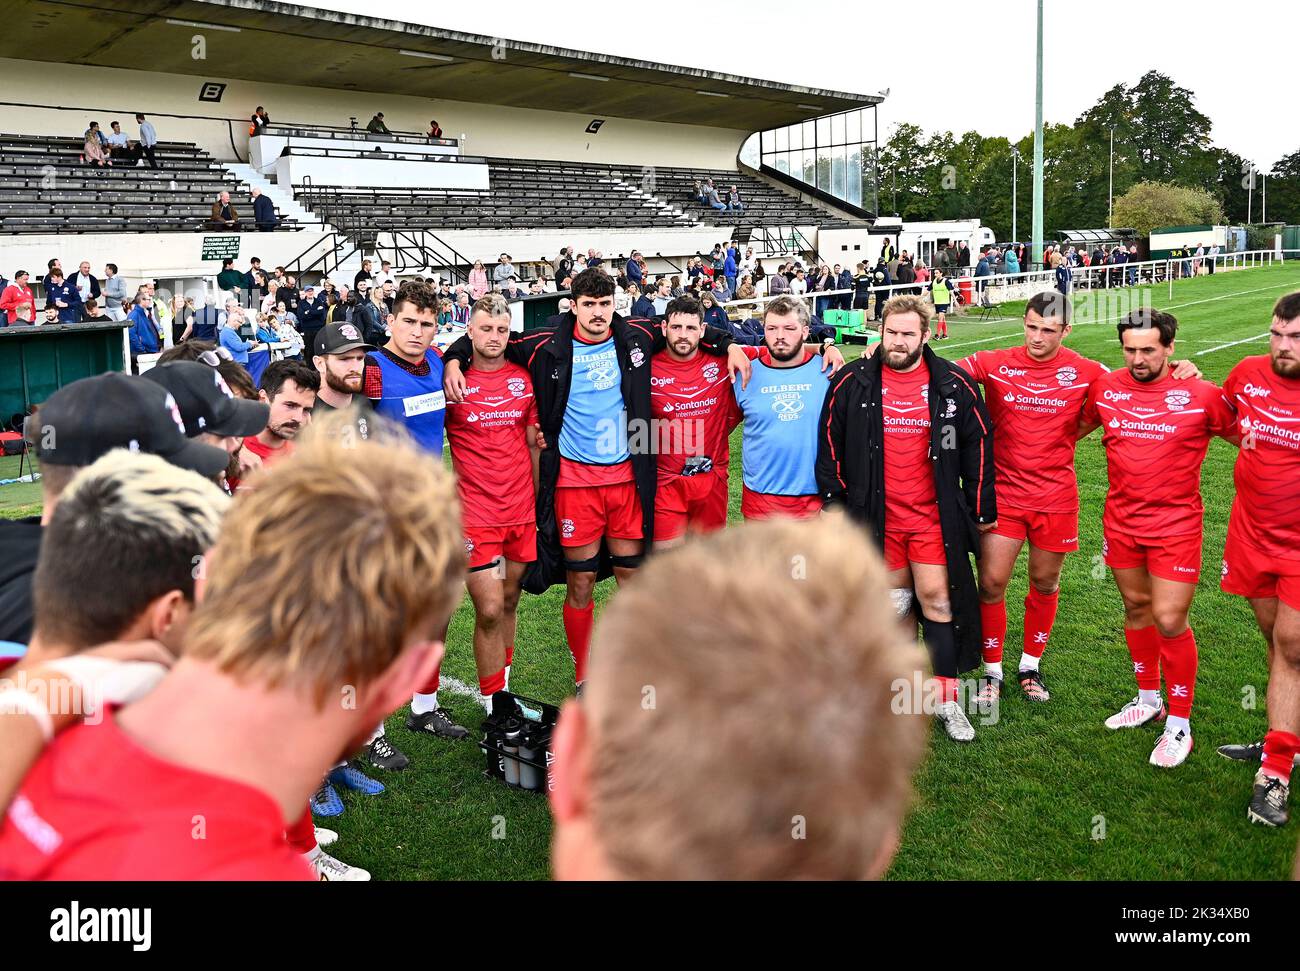 Richmond, United Kingdom. 24th Sep, 2022. Championship Rugby. London Scottish V Jersey Reds. The Richmond Athletic Ground. Richmond. he Jersey huddle at the end of the London Scottish V Jersey Reds championship rugby match. Credit: Sport In Pictures/Alamy Live News Stock Photo